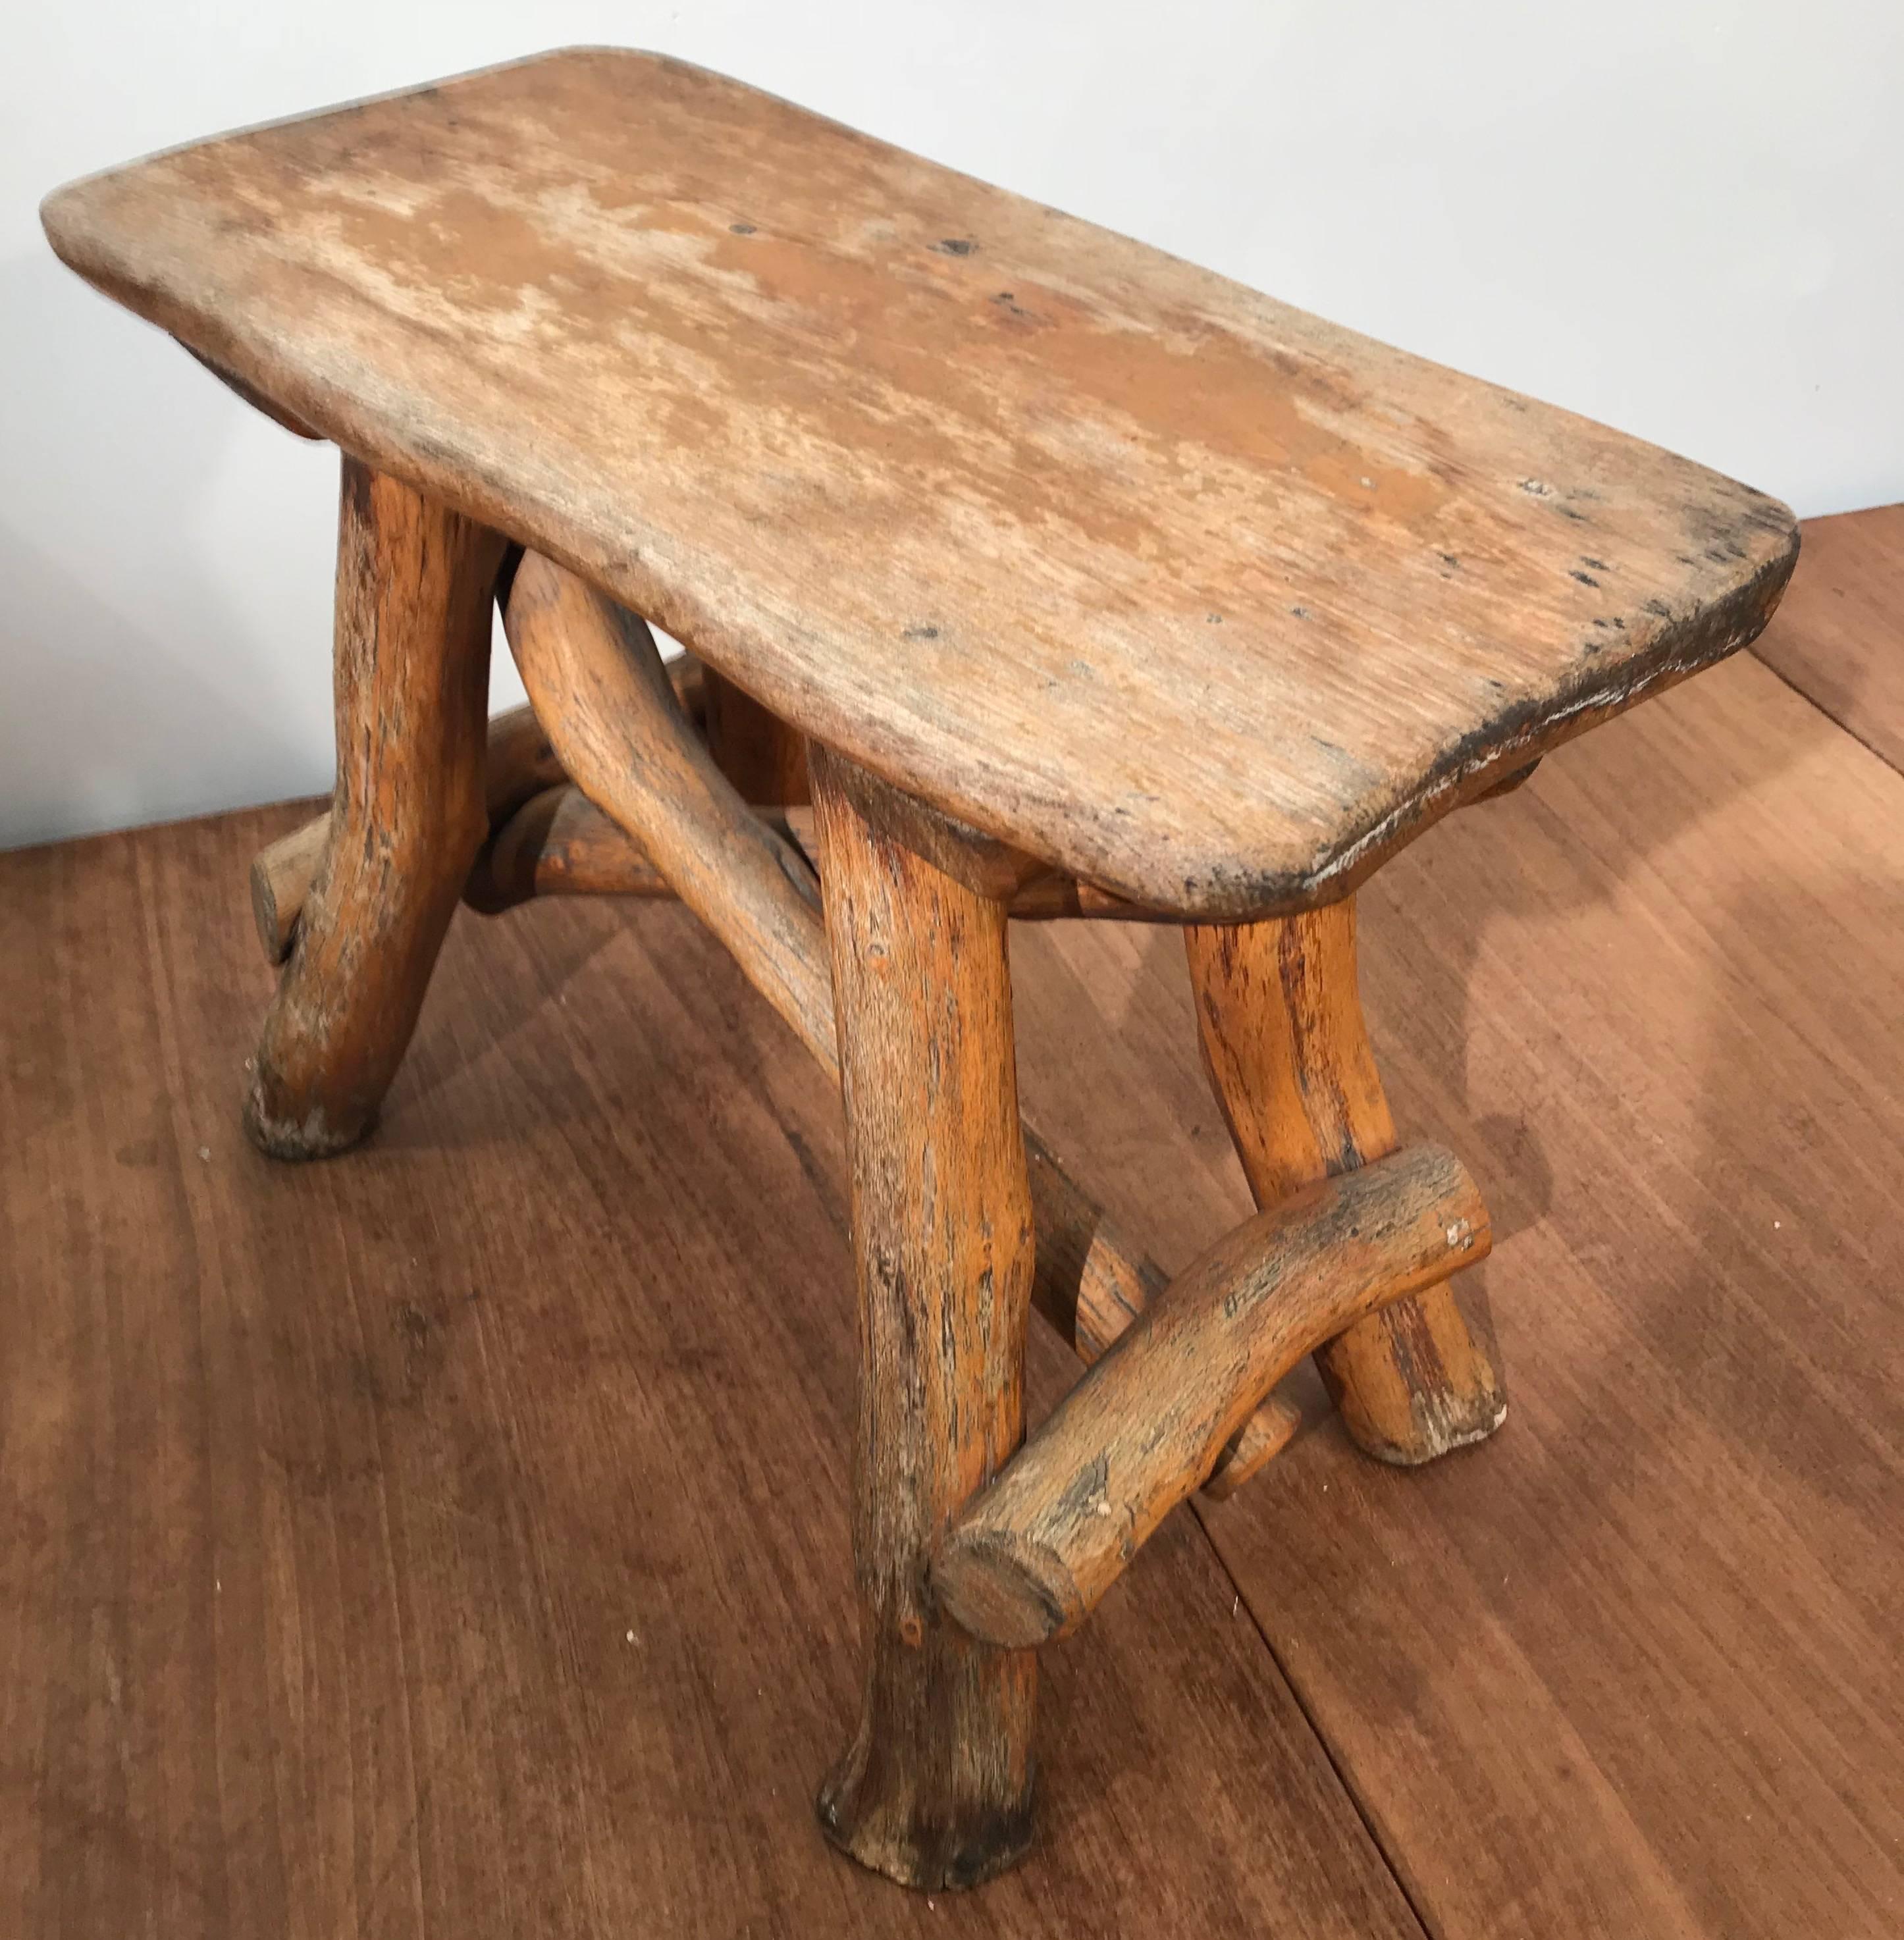 Antique Hand-Crafted Rustic and Organic Oak Tree Stool for Indoor or Outdoor For Sale 3